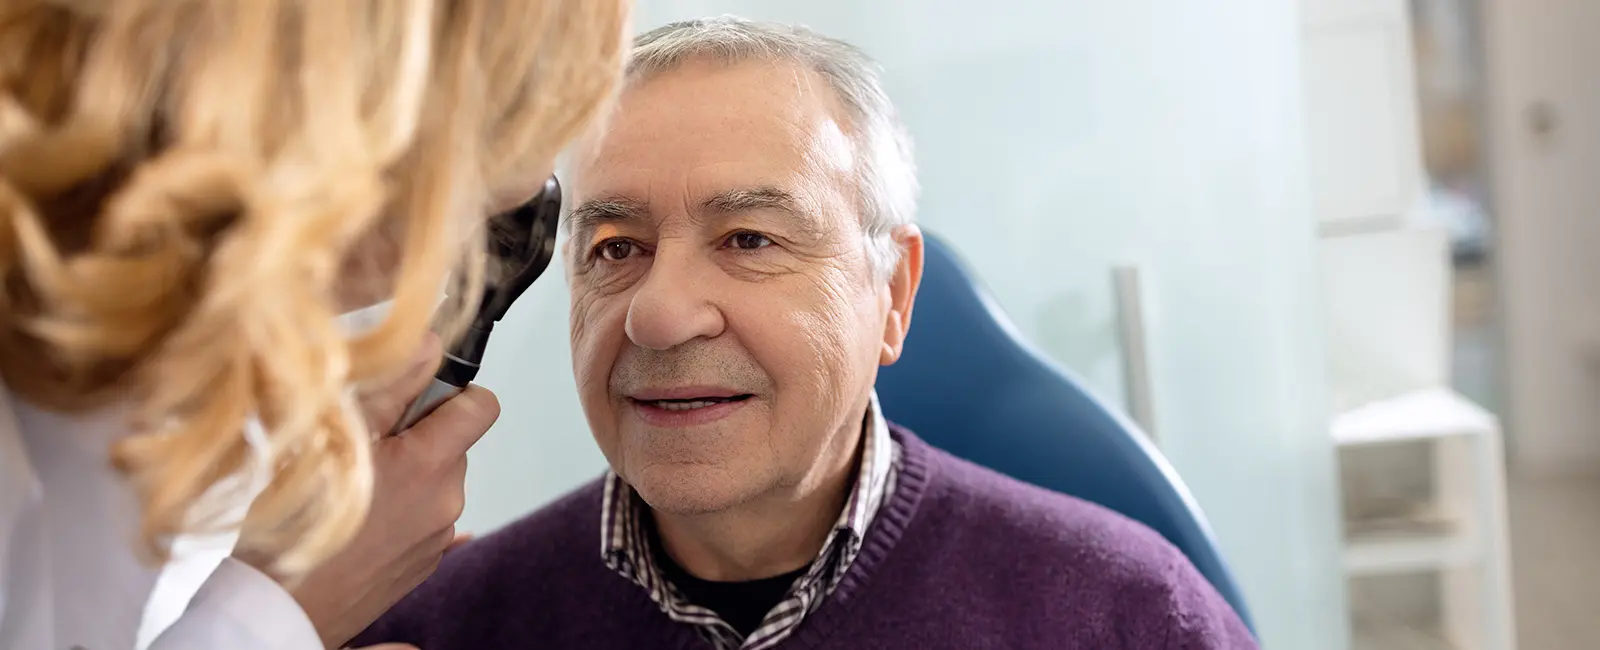 Cataract Factaracts: What Causes Cataracts?